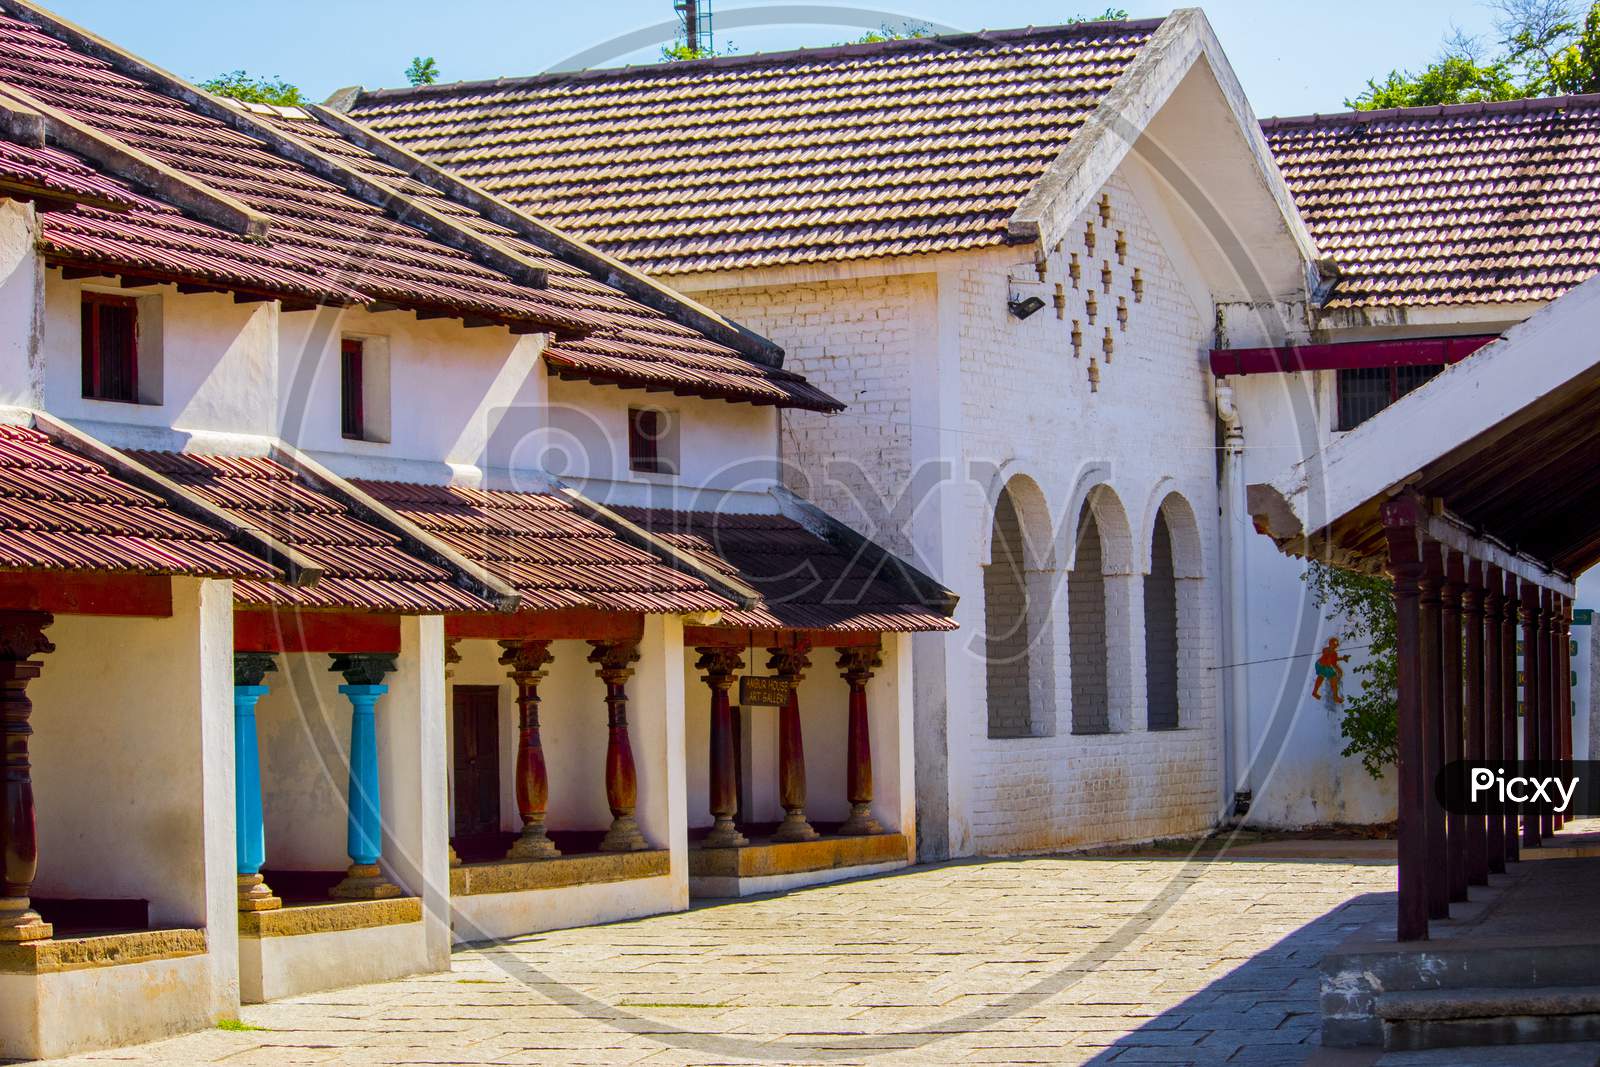 Architecture Of Tile Roofed Huts In Indian Rural Villages  in Tanjavur